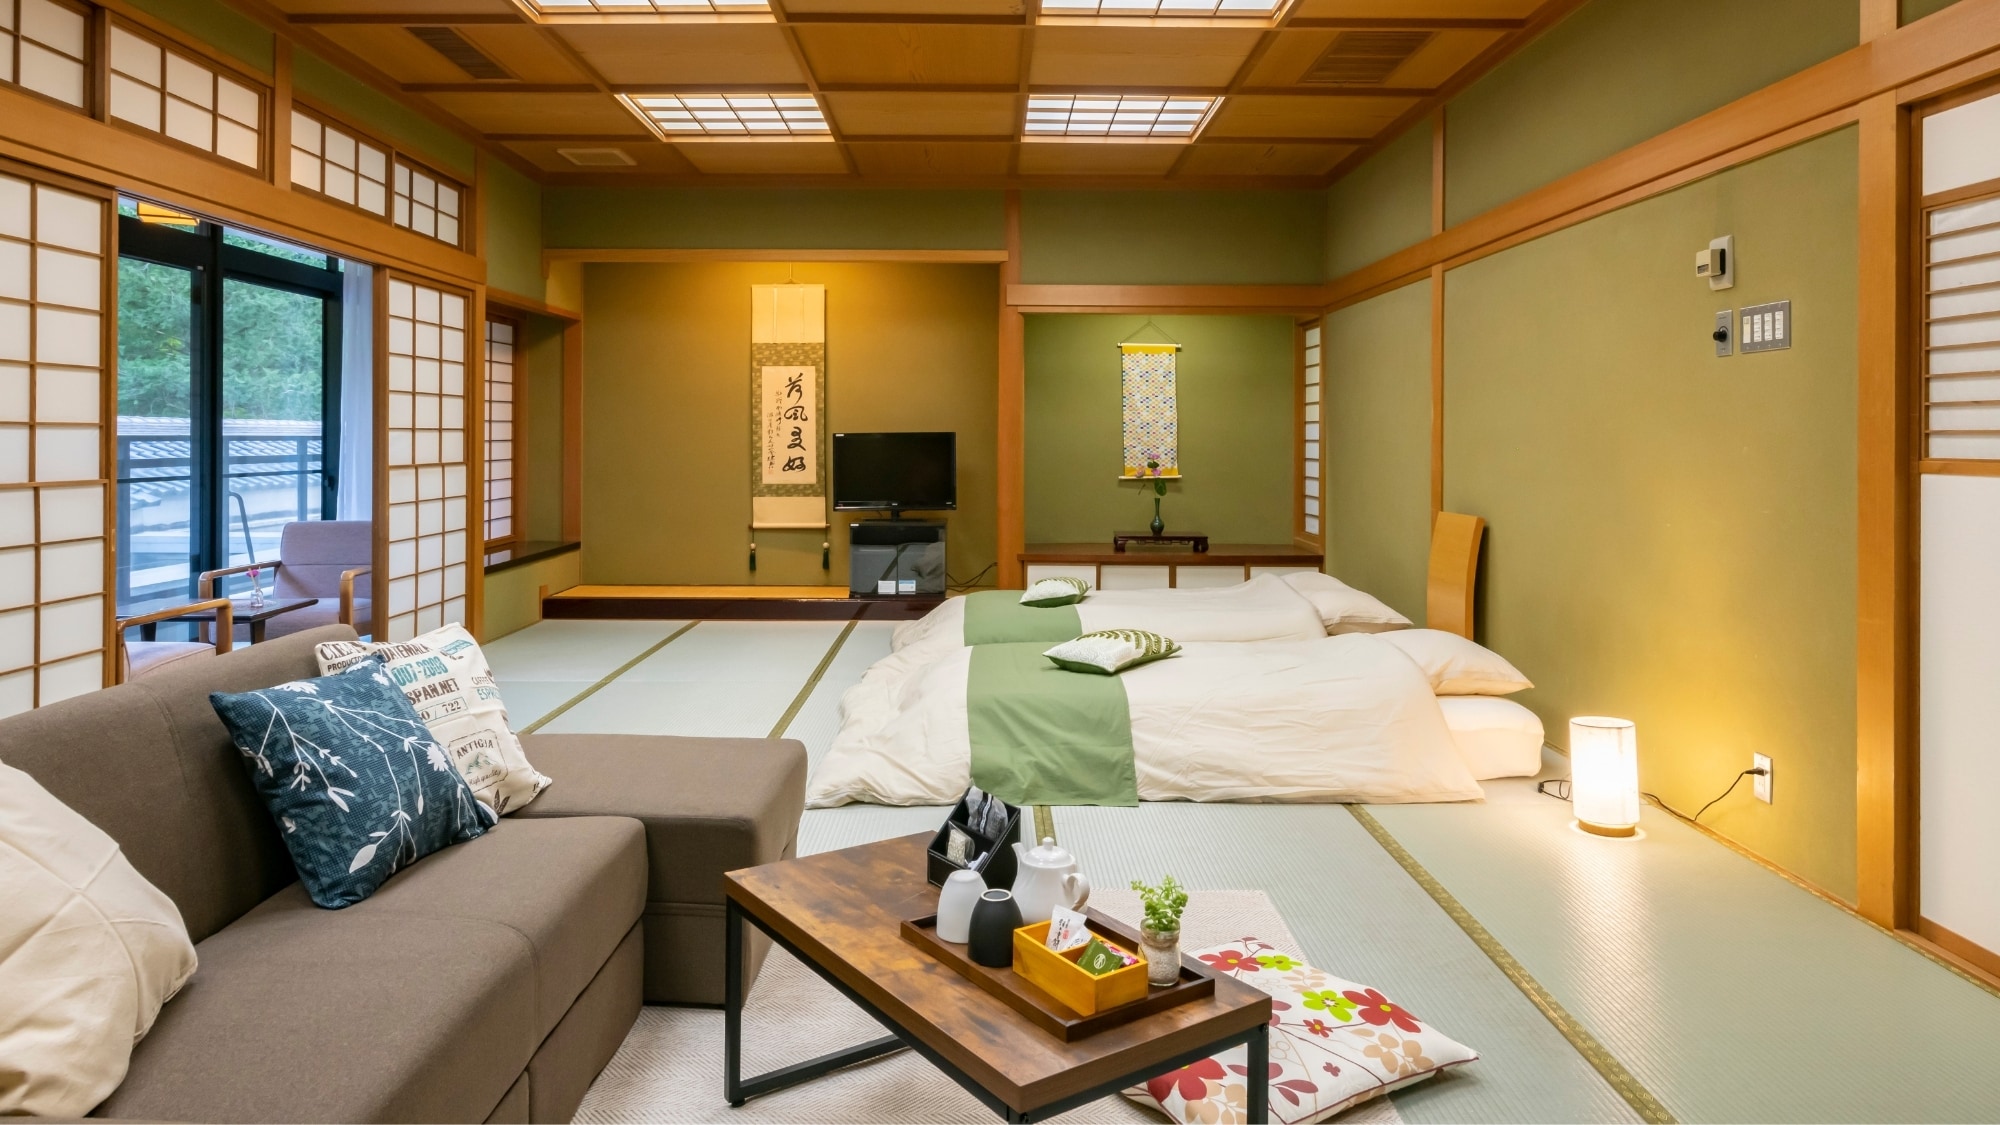 A Japanese-Western style room where you can relax on the sofa, stretch your legs on the tatami mats, and relax freely.